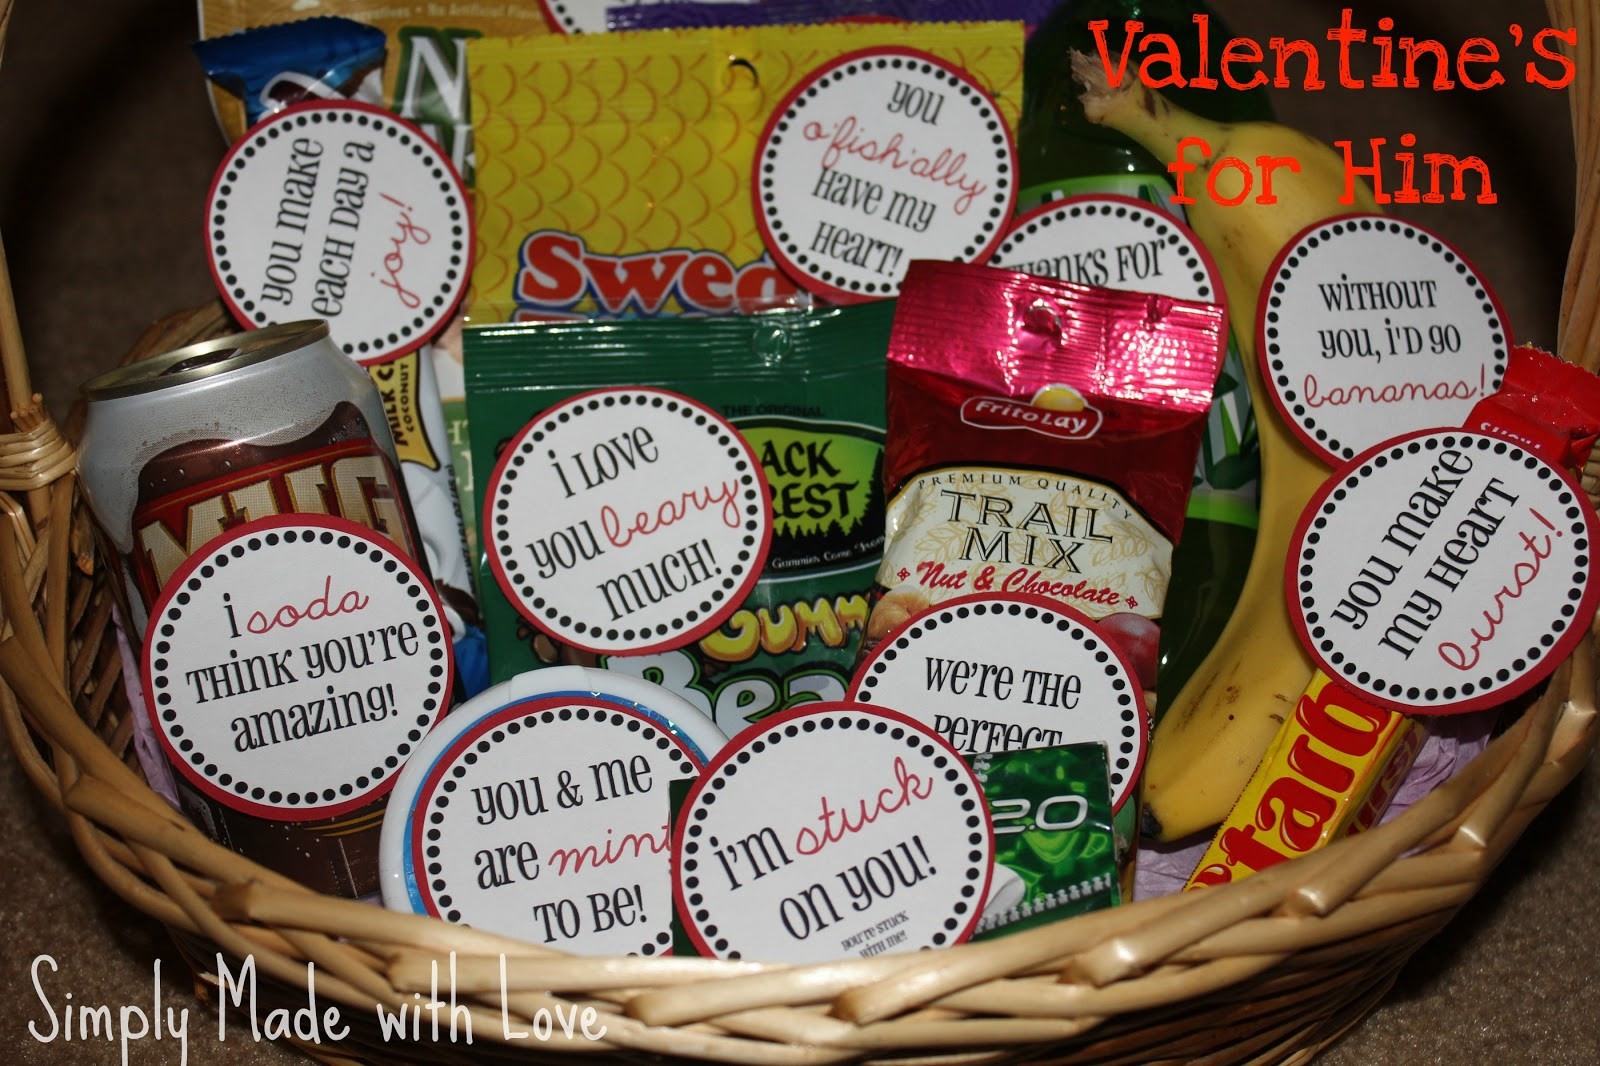 Gift Ideas For Him Valentines
 simply made with love Valentine s for Him & Free Printable